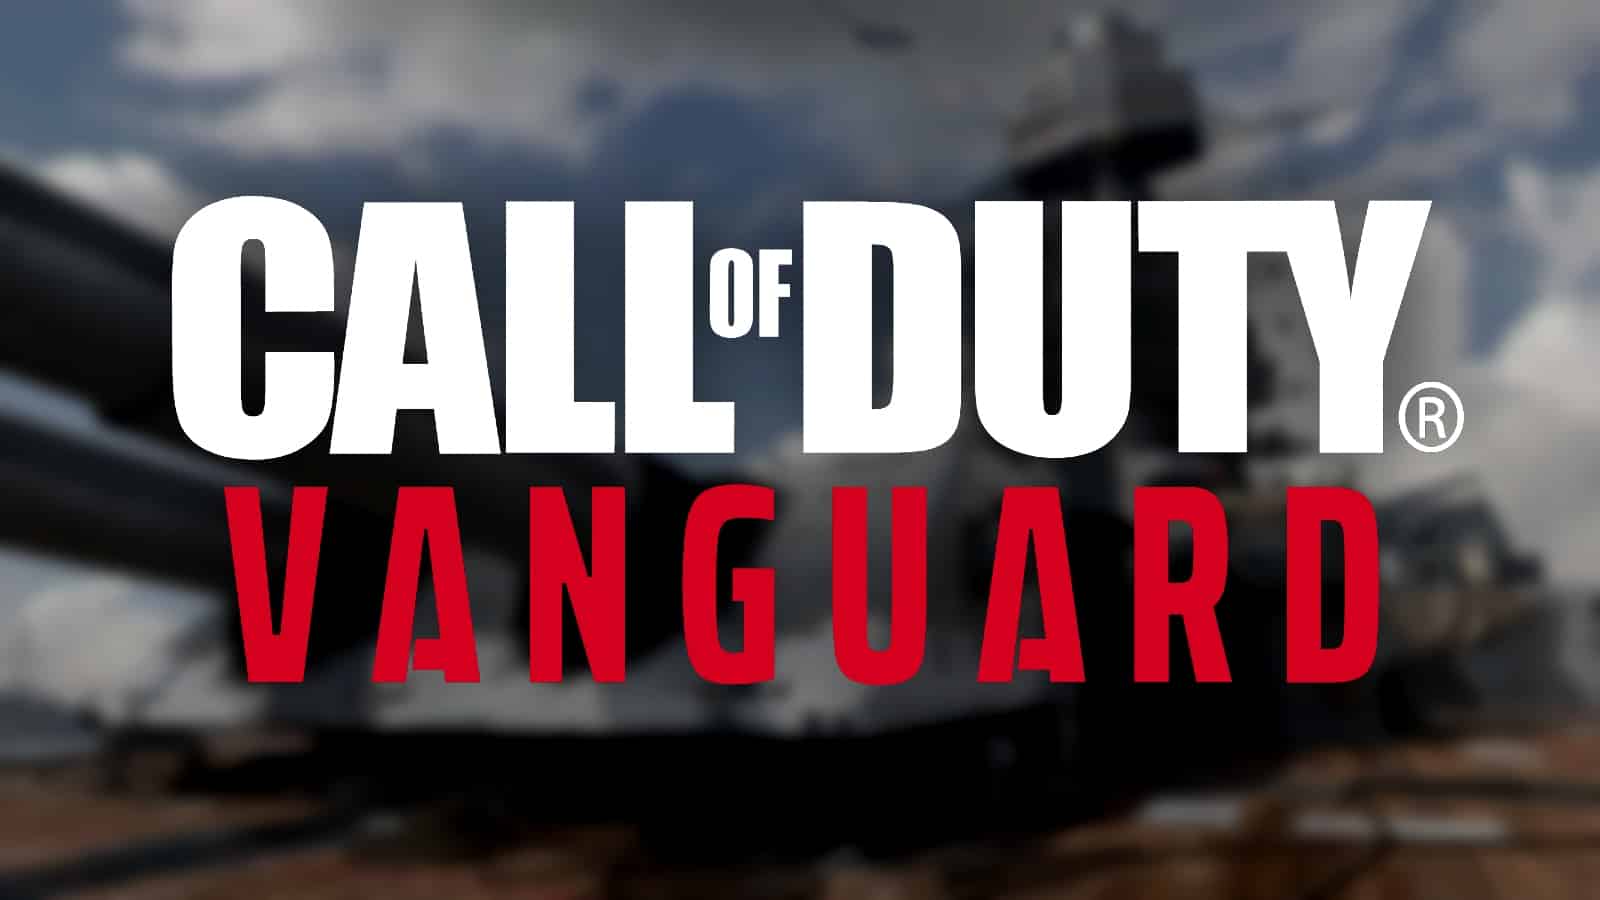 cod vanguard logo with blurred background of uss texas